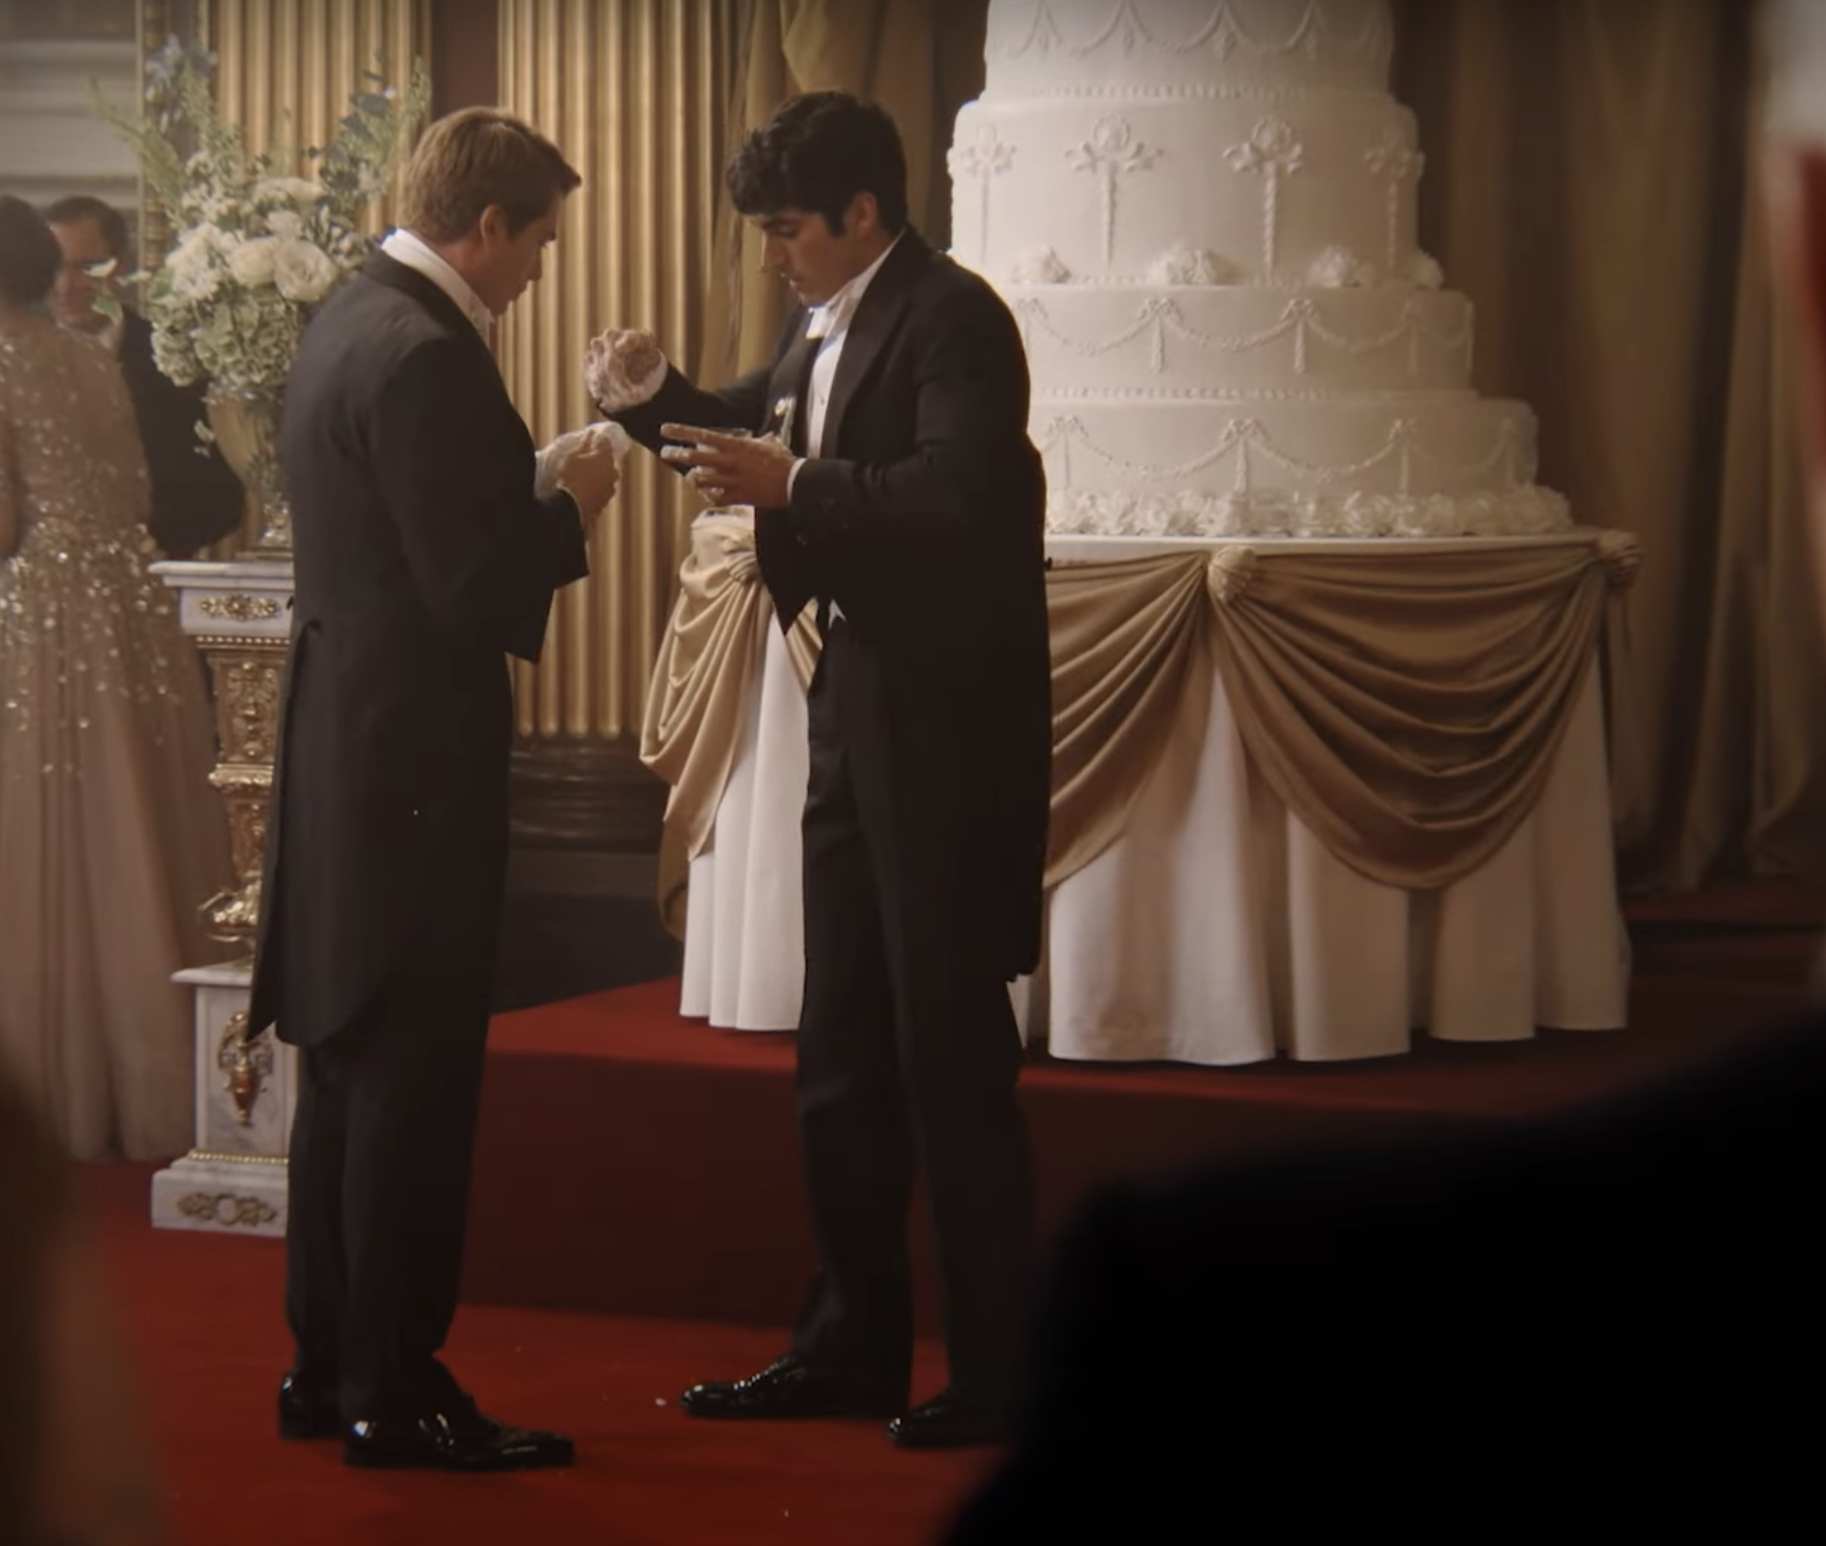 Two men in formal attire exchanging rings in front of a wedding cake